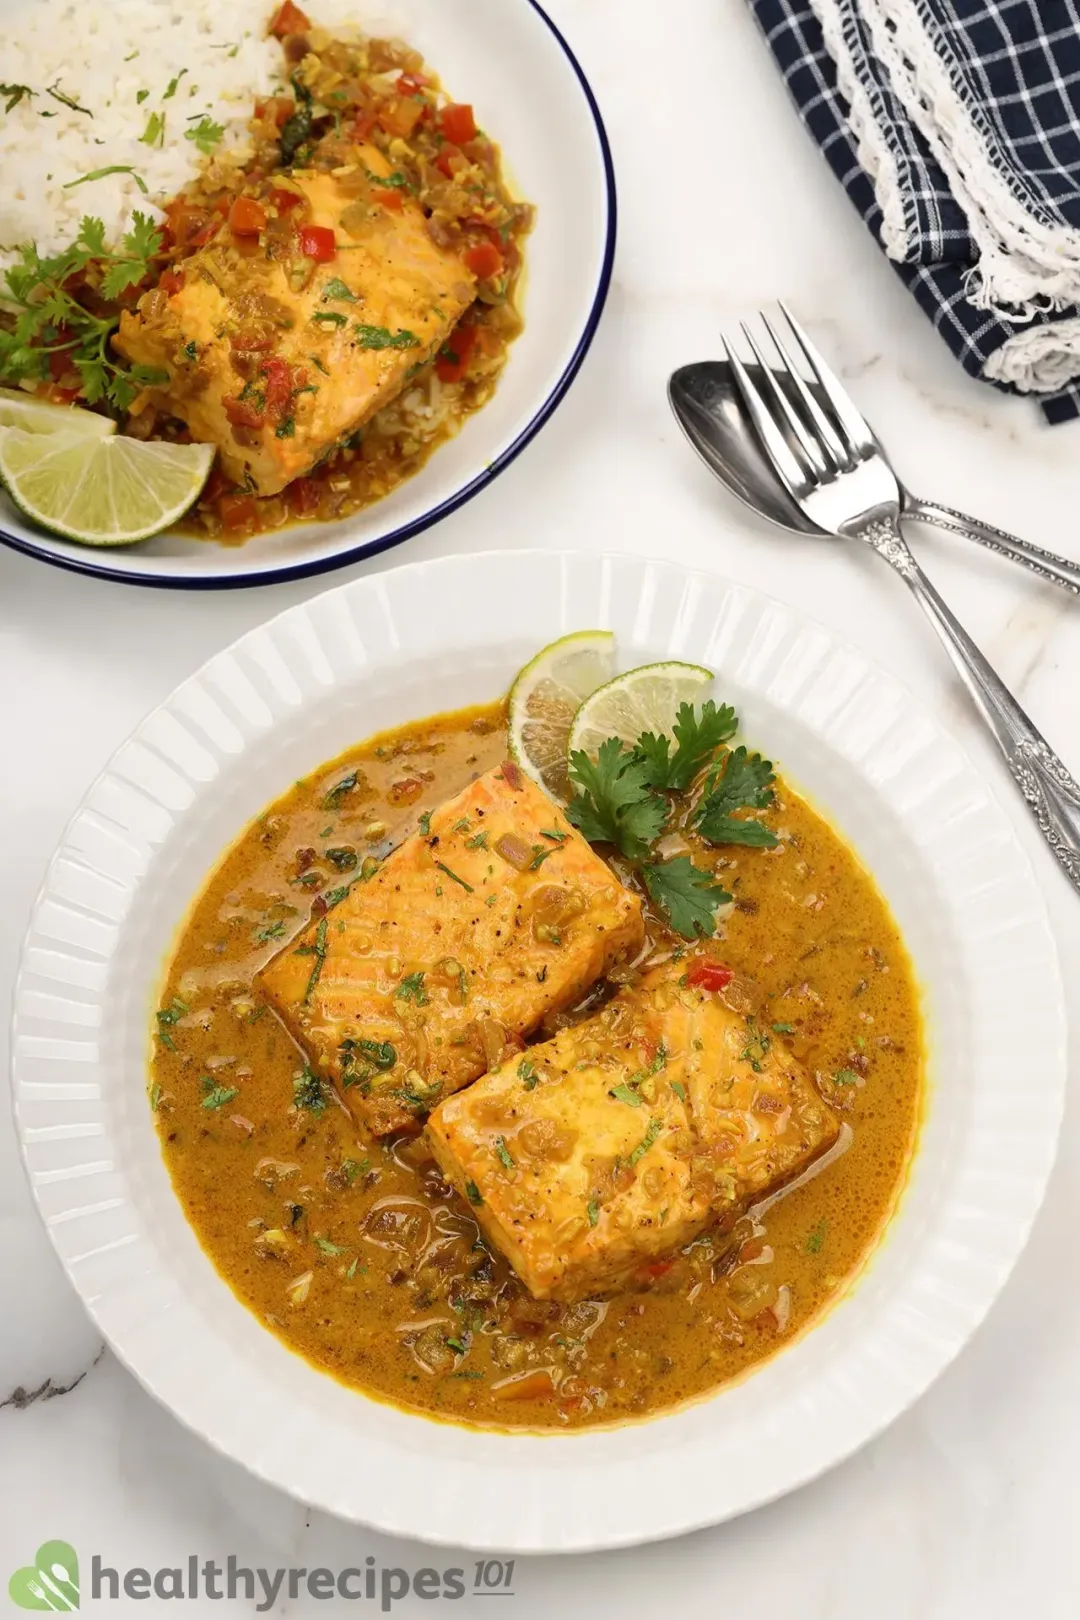 A white round deep plate containing two rectangle cooked salmon fillets drenched in a dark yellow curry